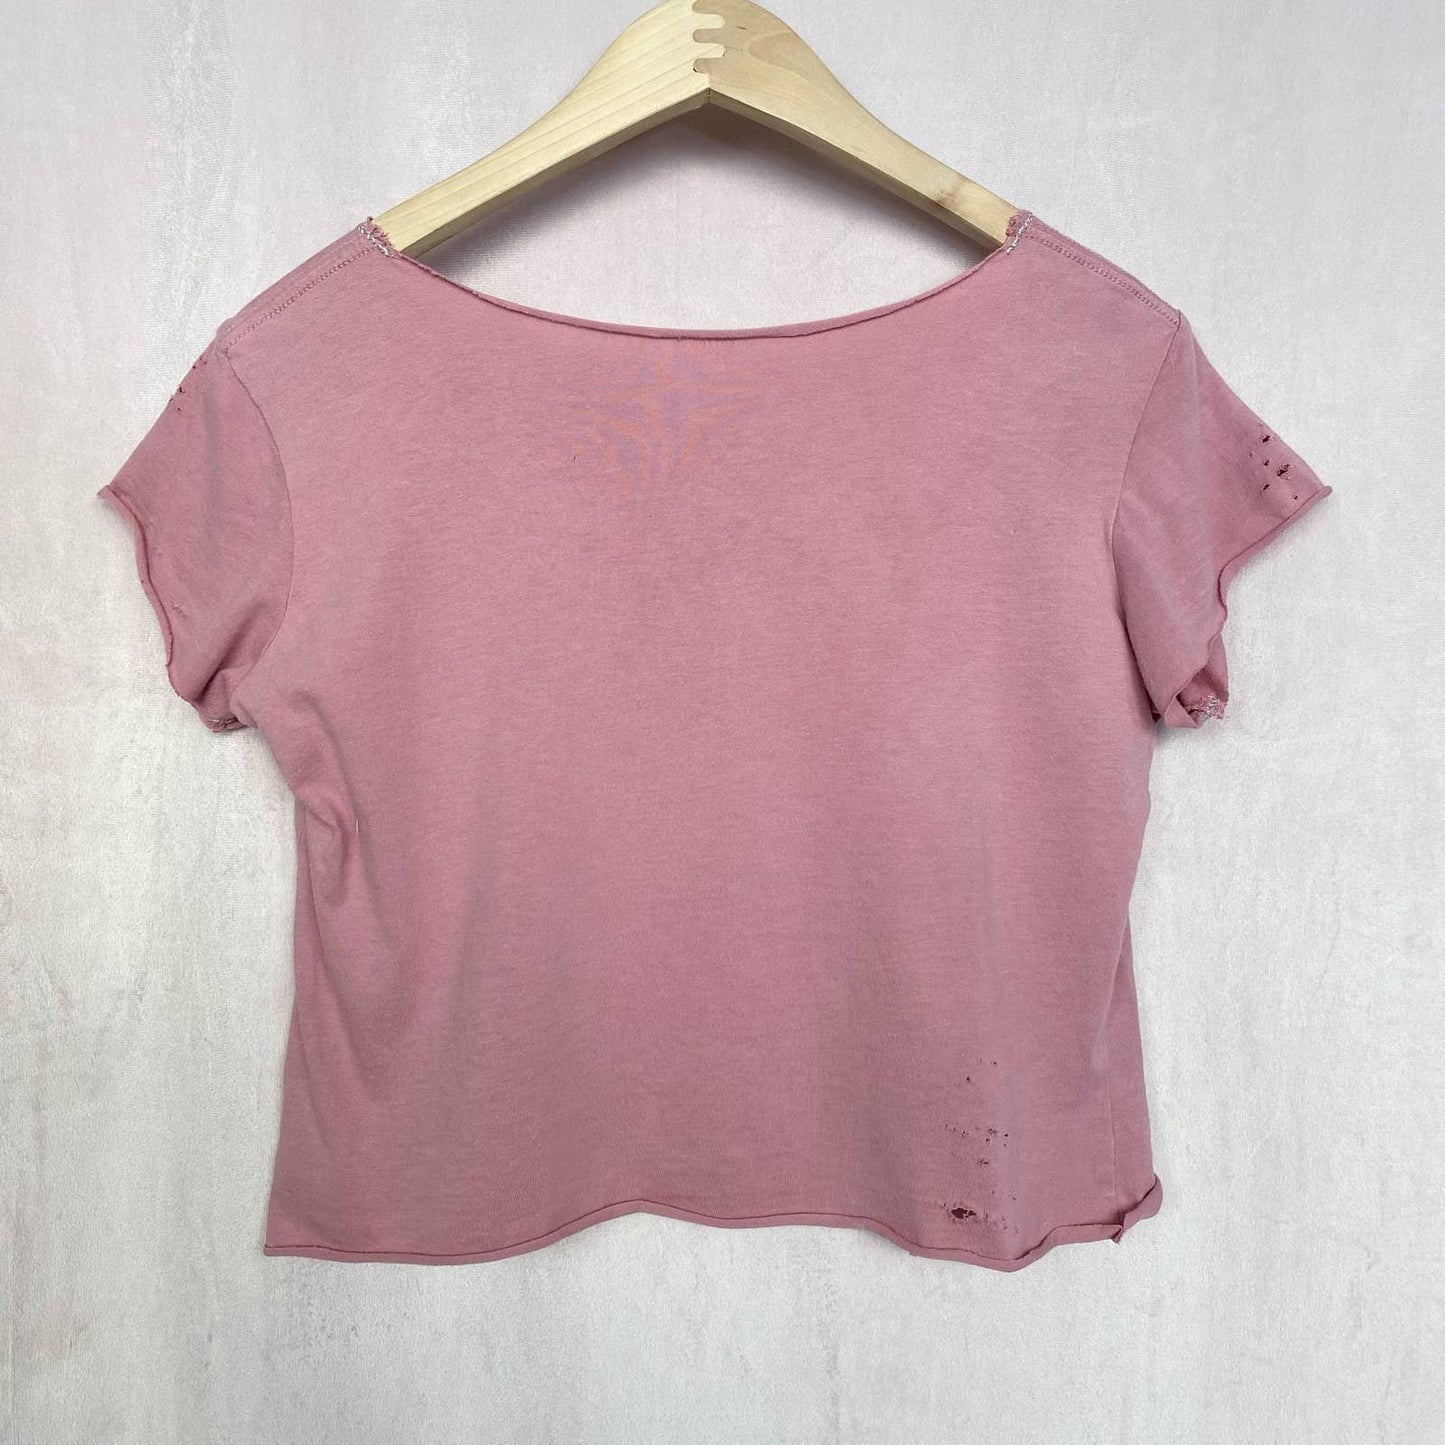 Reworked Cotton On Distressed Daisy Crop Tee, Size XXS